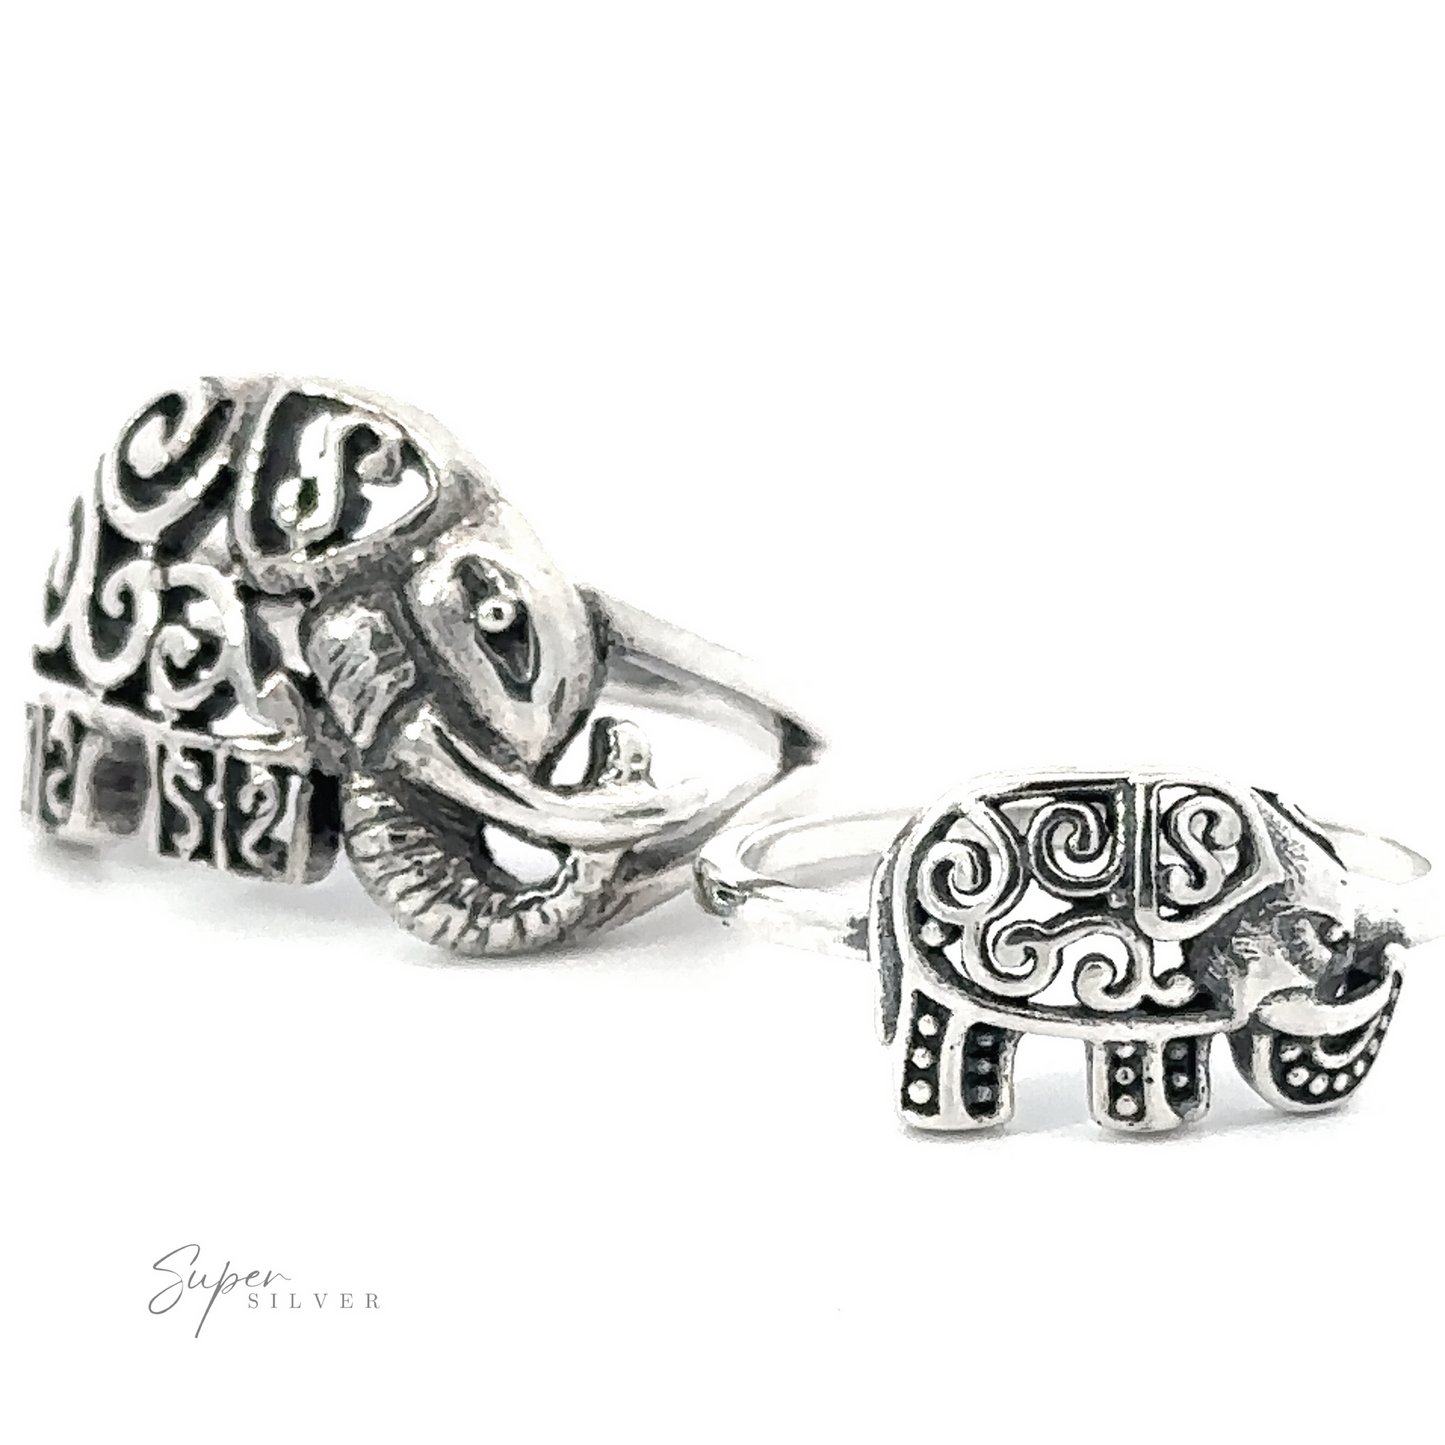 Filigree Elephant Ring with ornate patterns on a white background.